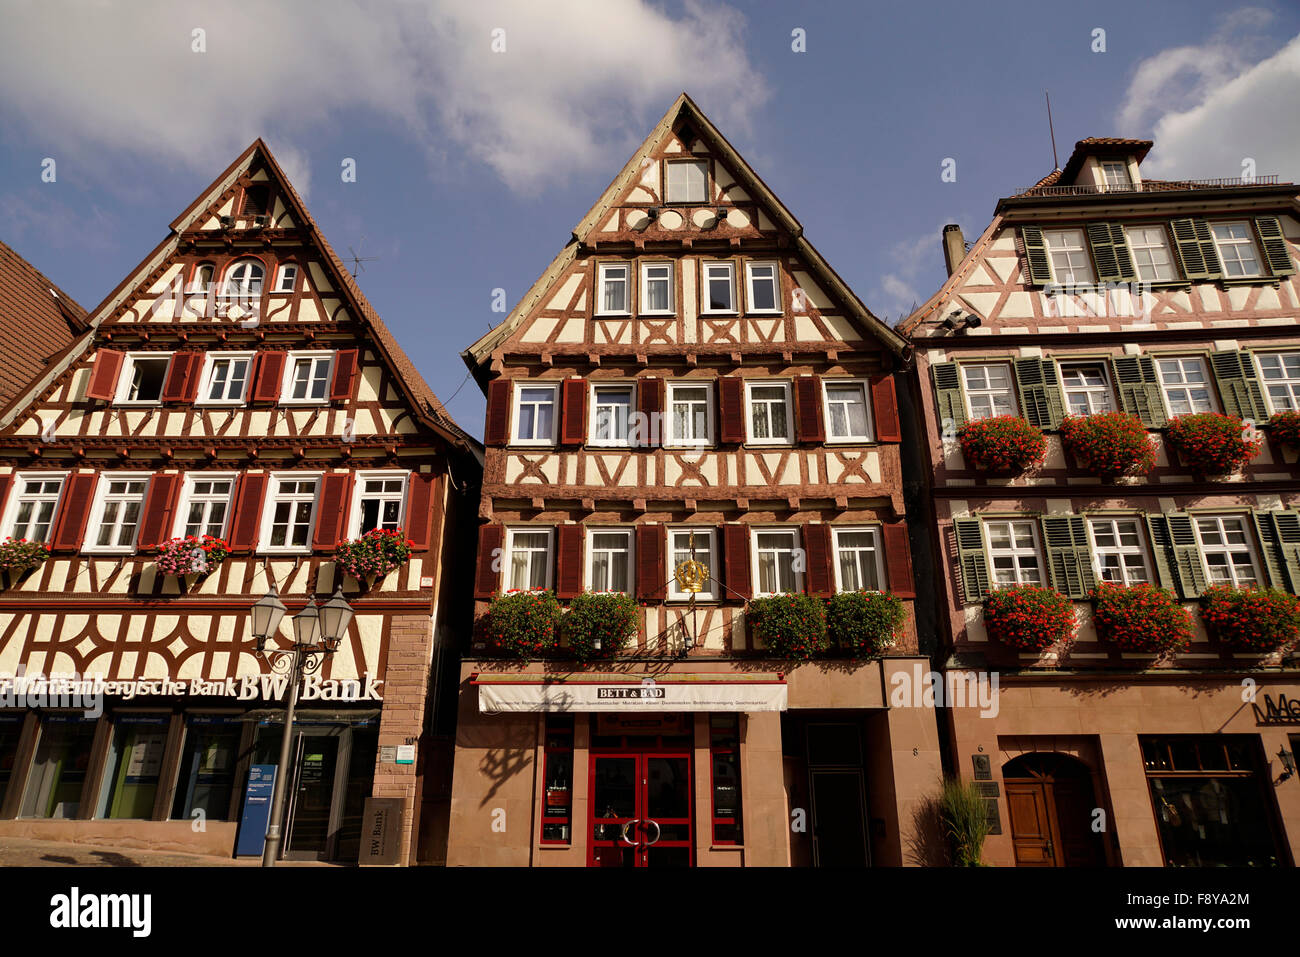 timber-framed houses at market square in Calw, Baden-Wuerttemberg, Germany Stock Photo